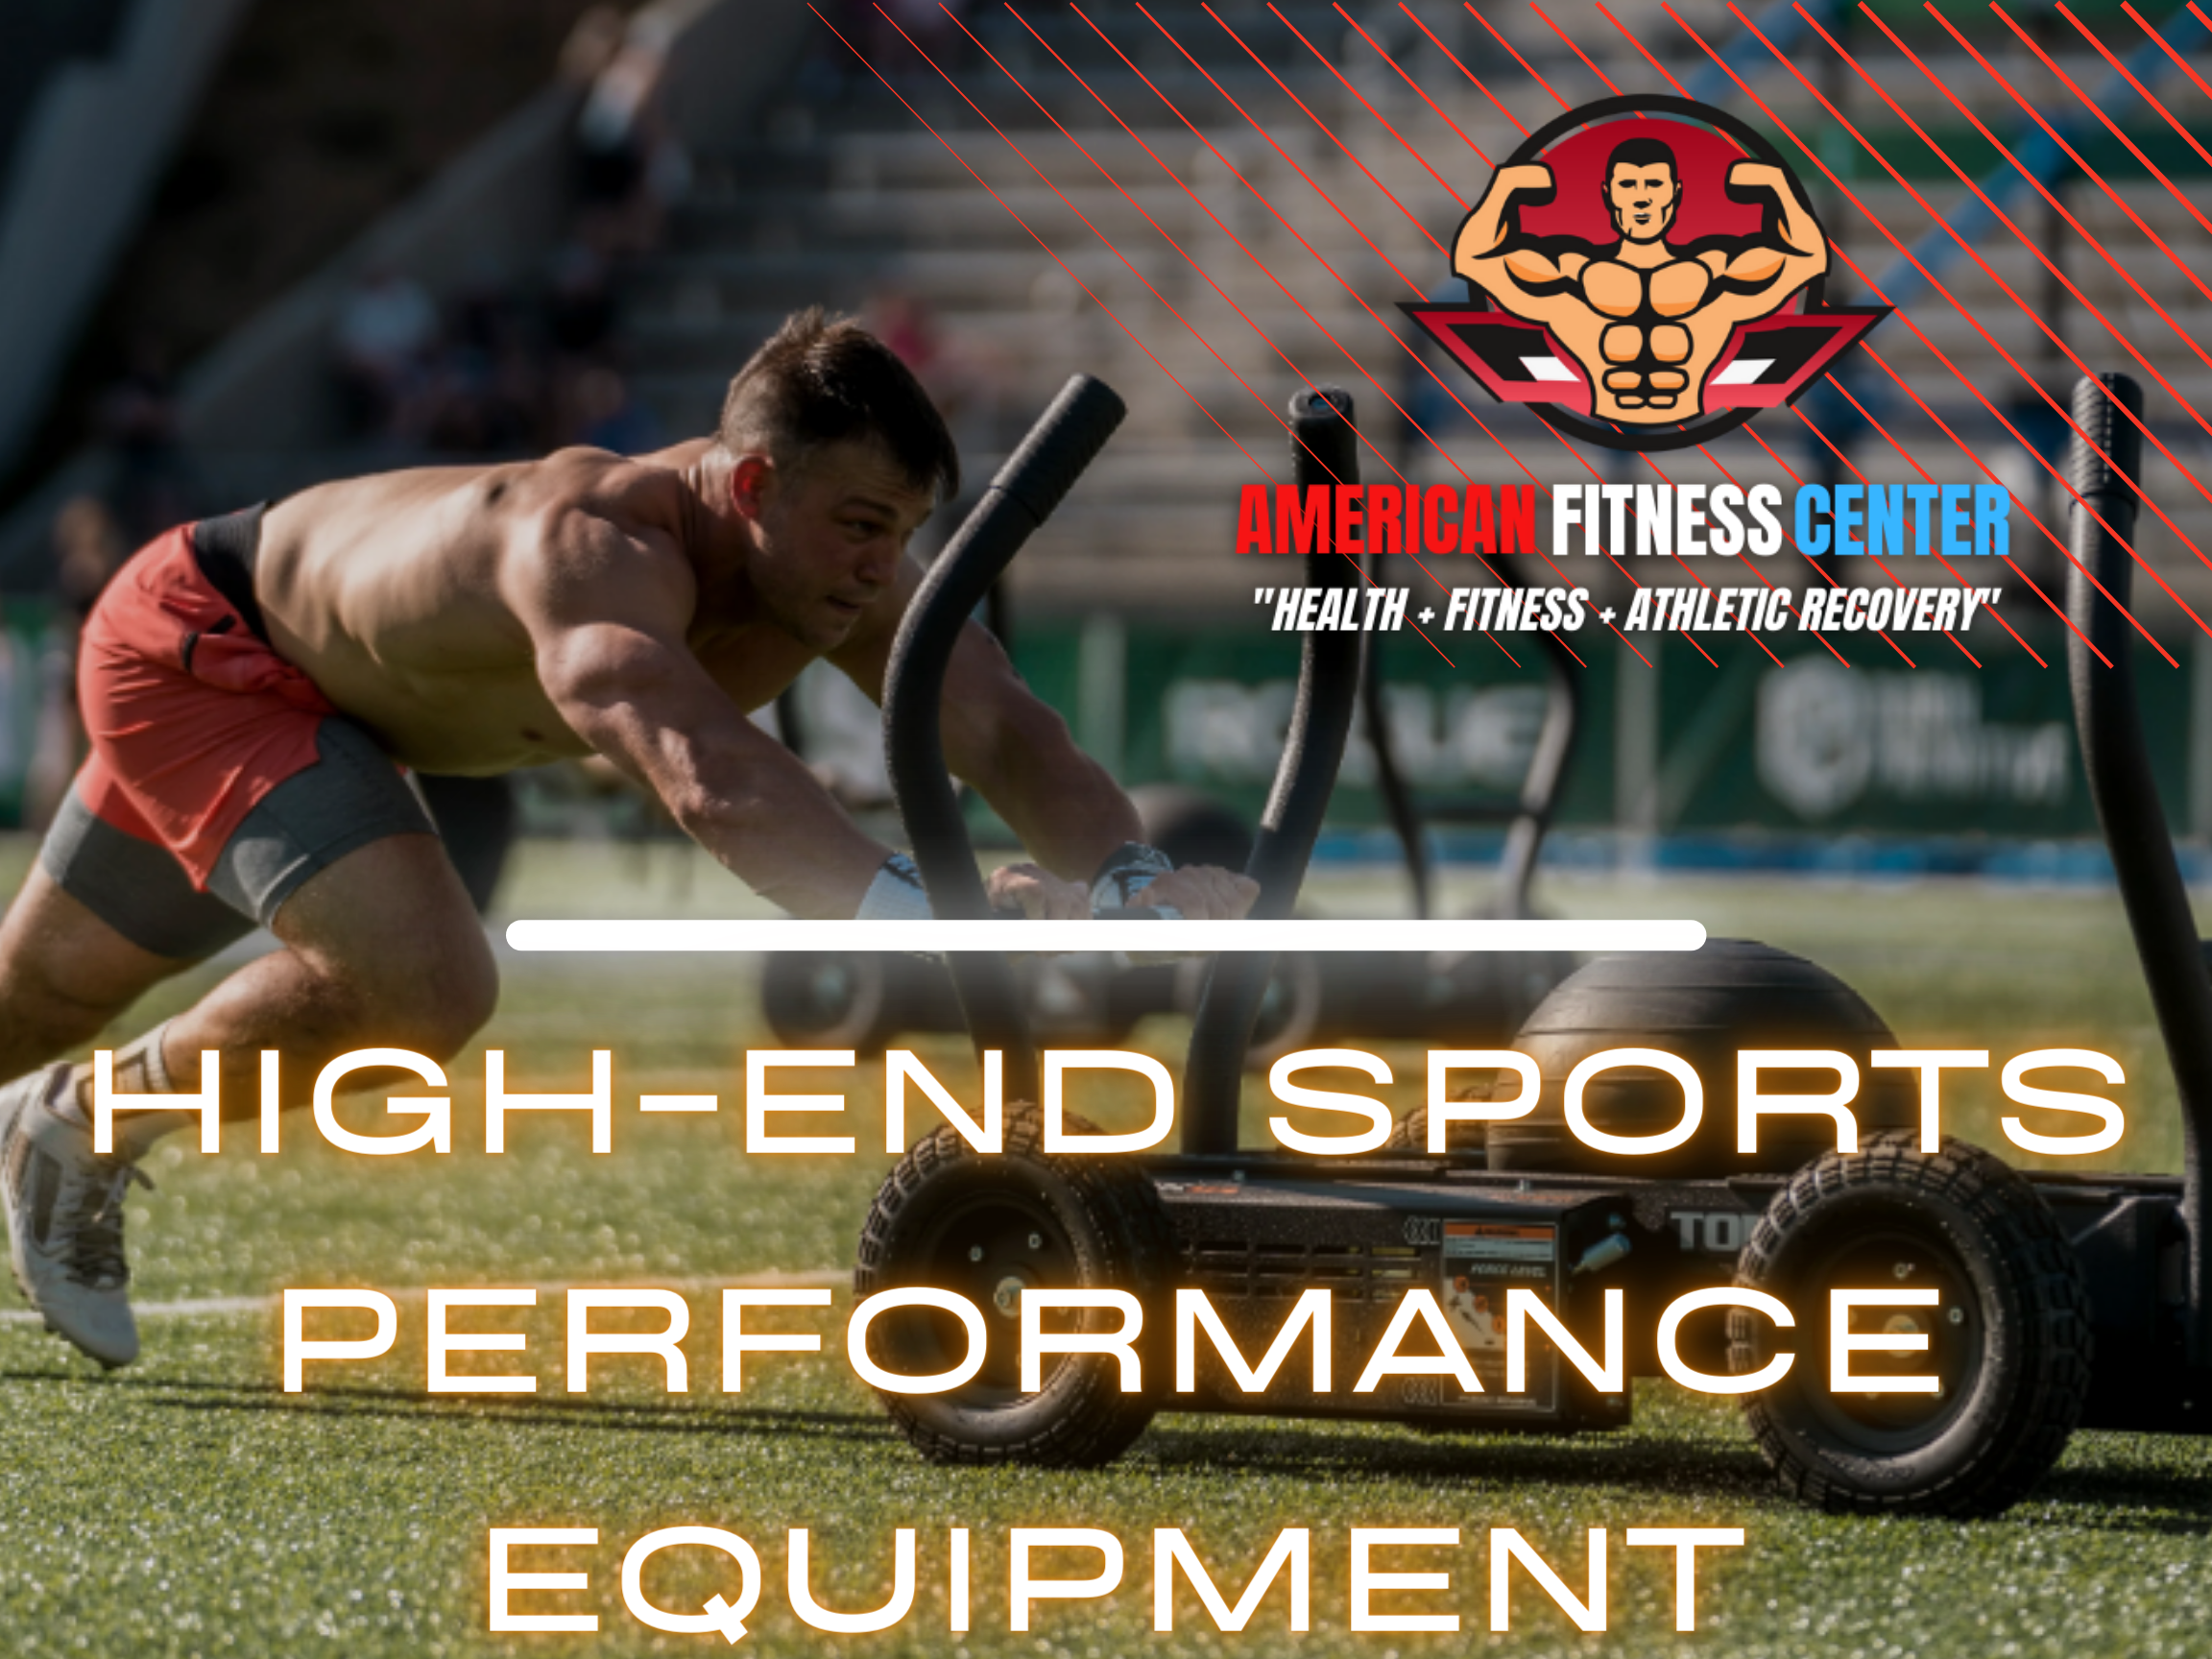 High-End-Sports-Strength-Conditioning-Training-Near-Me-In-Roswell-GA-American-Fitness-Center-West-Roswell